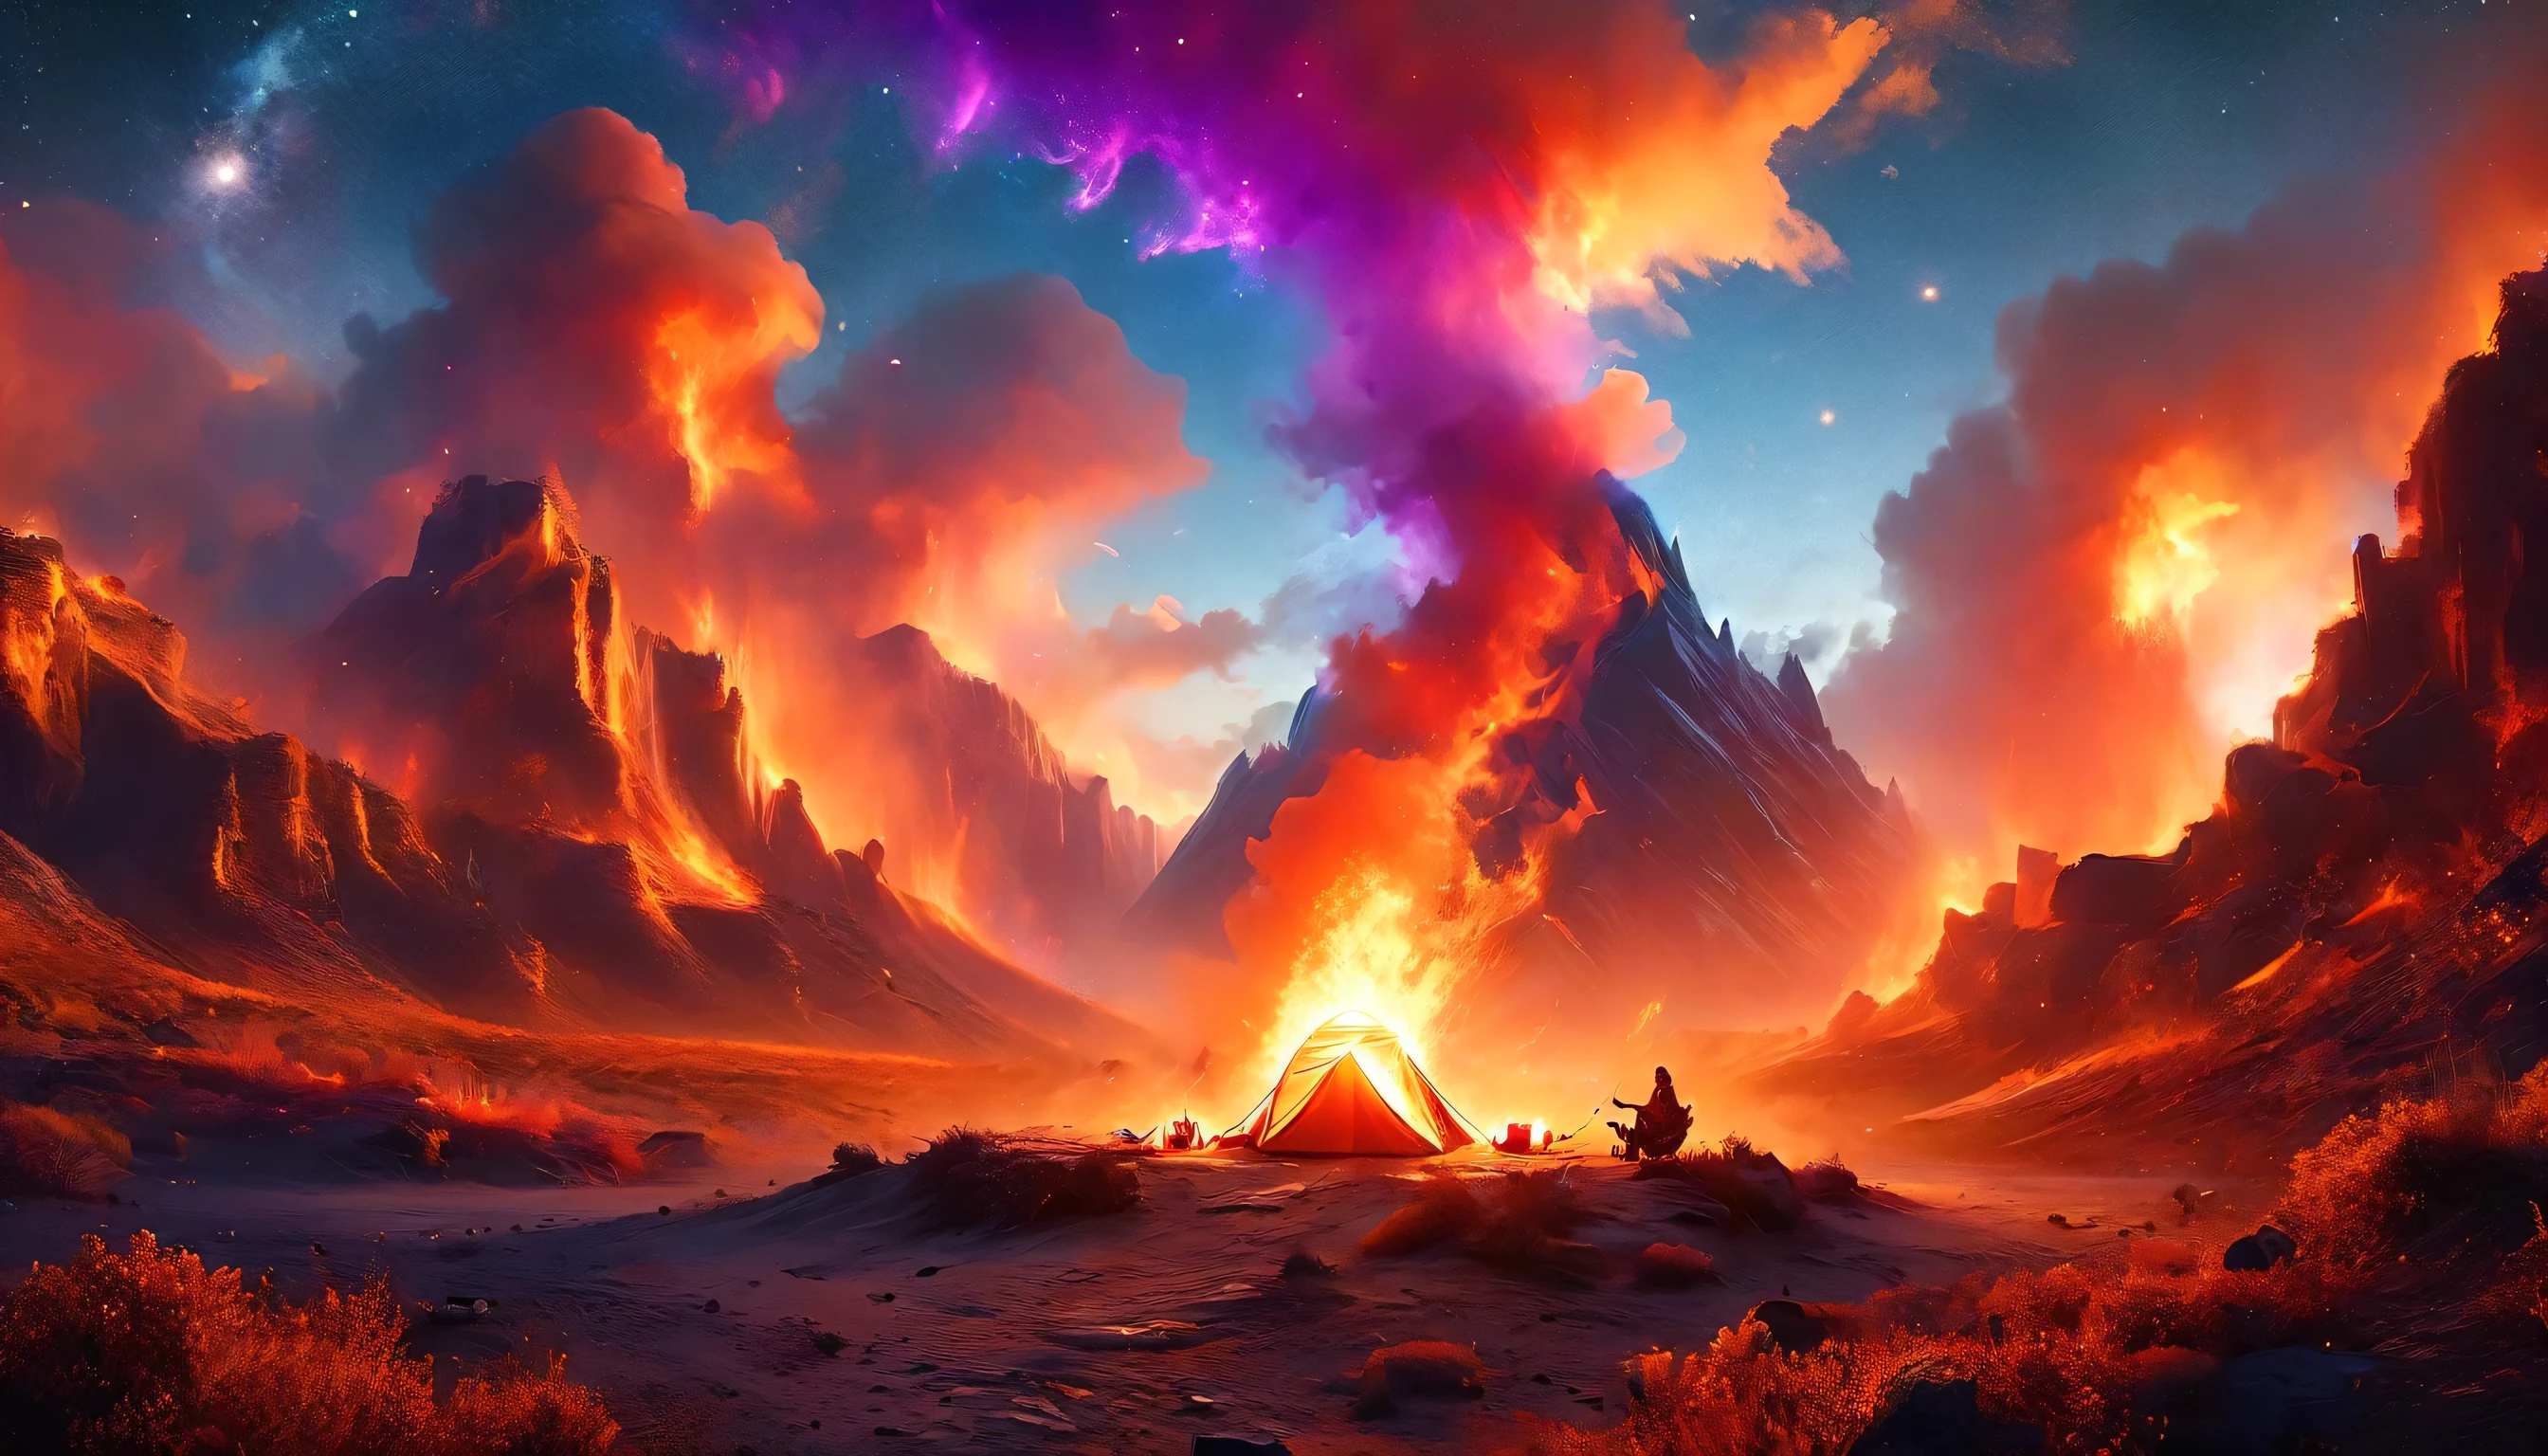 arafed, a picture of a camping (tent: 1.2) and small (campfire: 1.3), on a desert mountaintop, its sunset the sky are in various shades of  (red: 1.1), (orange: 1.1), (azure: 1.1) (purple:1.1) there is smoke rising from the fire camp, there is a magnificent view of the desert canyon and ravines, there is sparce trees on the horizon, it is a time of serenity, peace, and relaxation, best quality, 16K,  photorealism, National Geographic award winning photoshoot, ultra wide shot, RagingNebula, ladyshadow